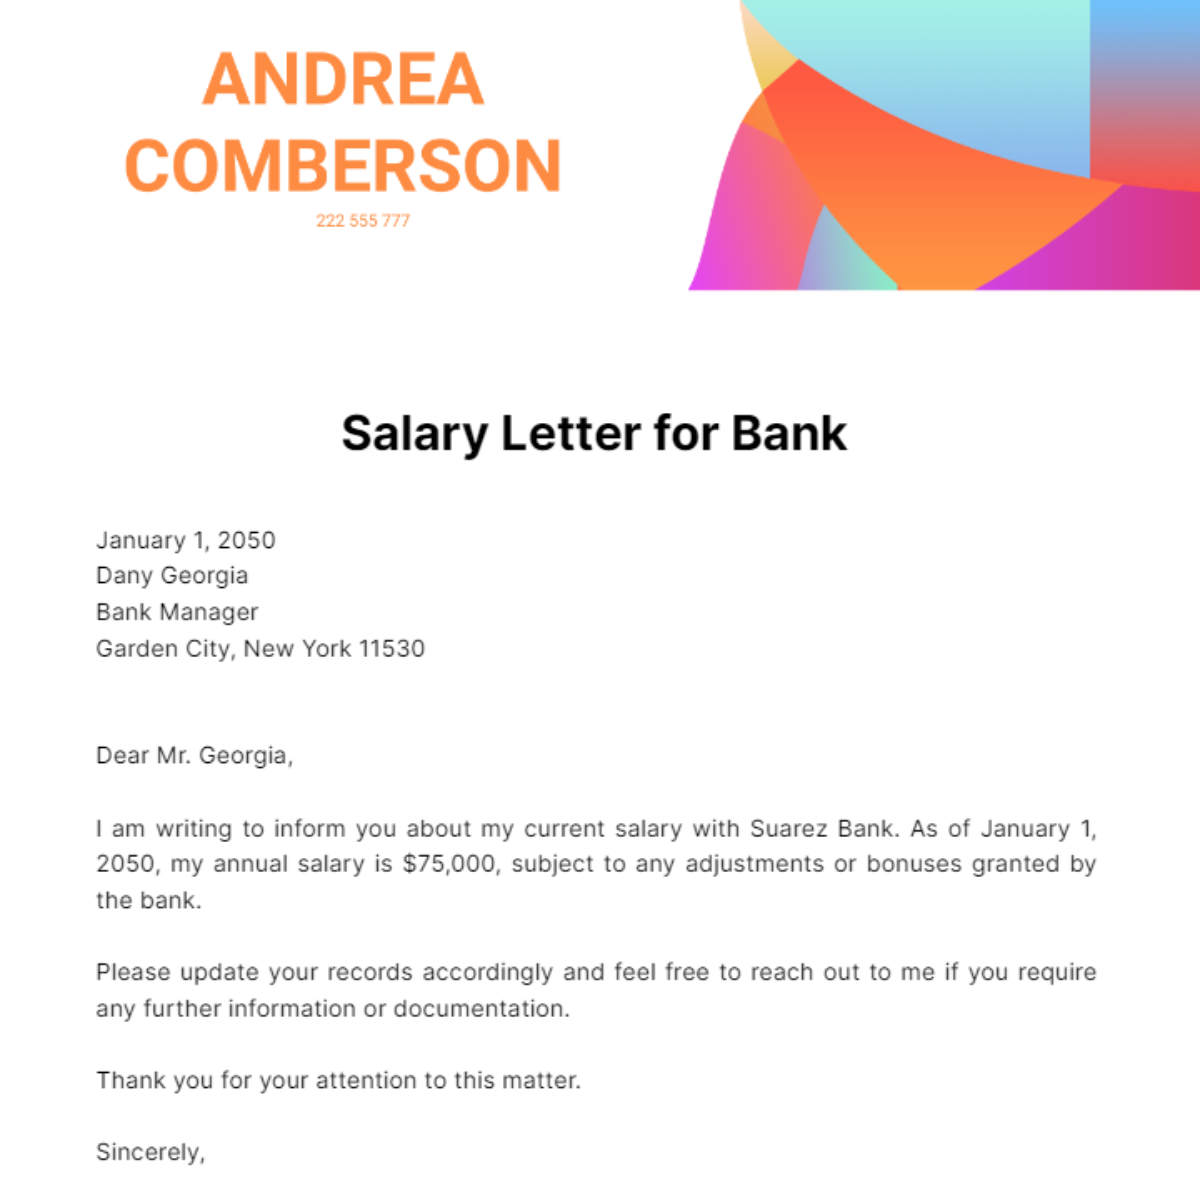 Salary Letter for Bank Template